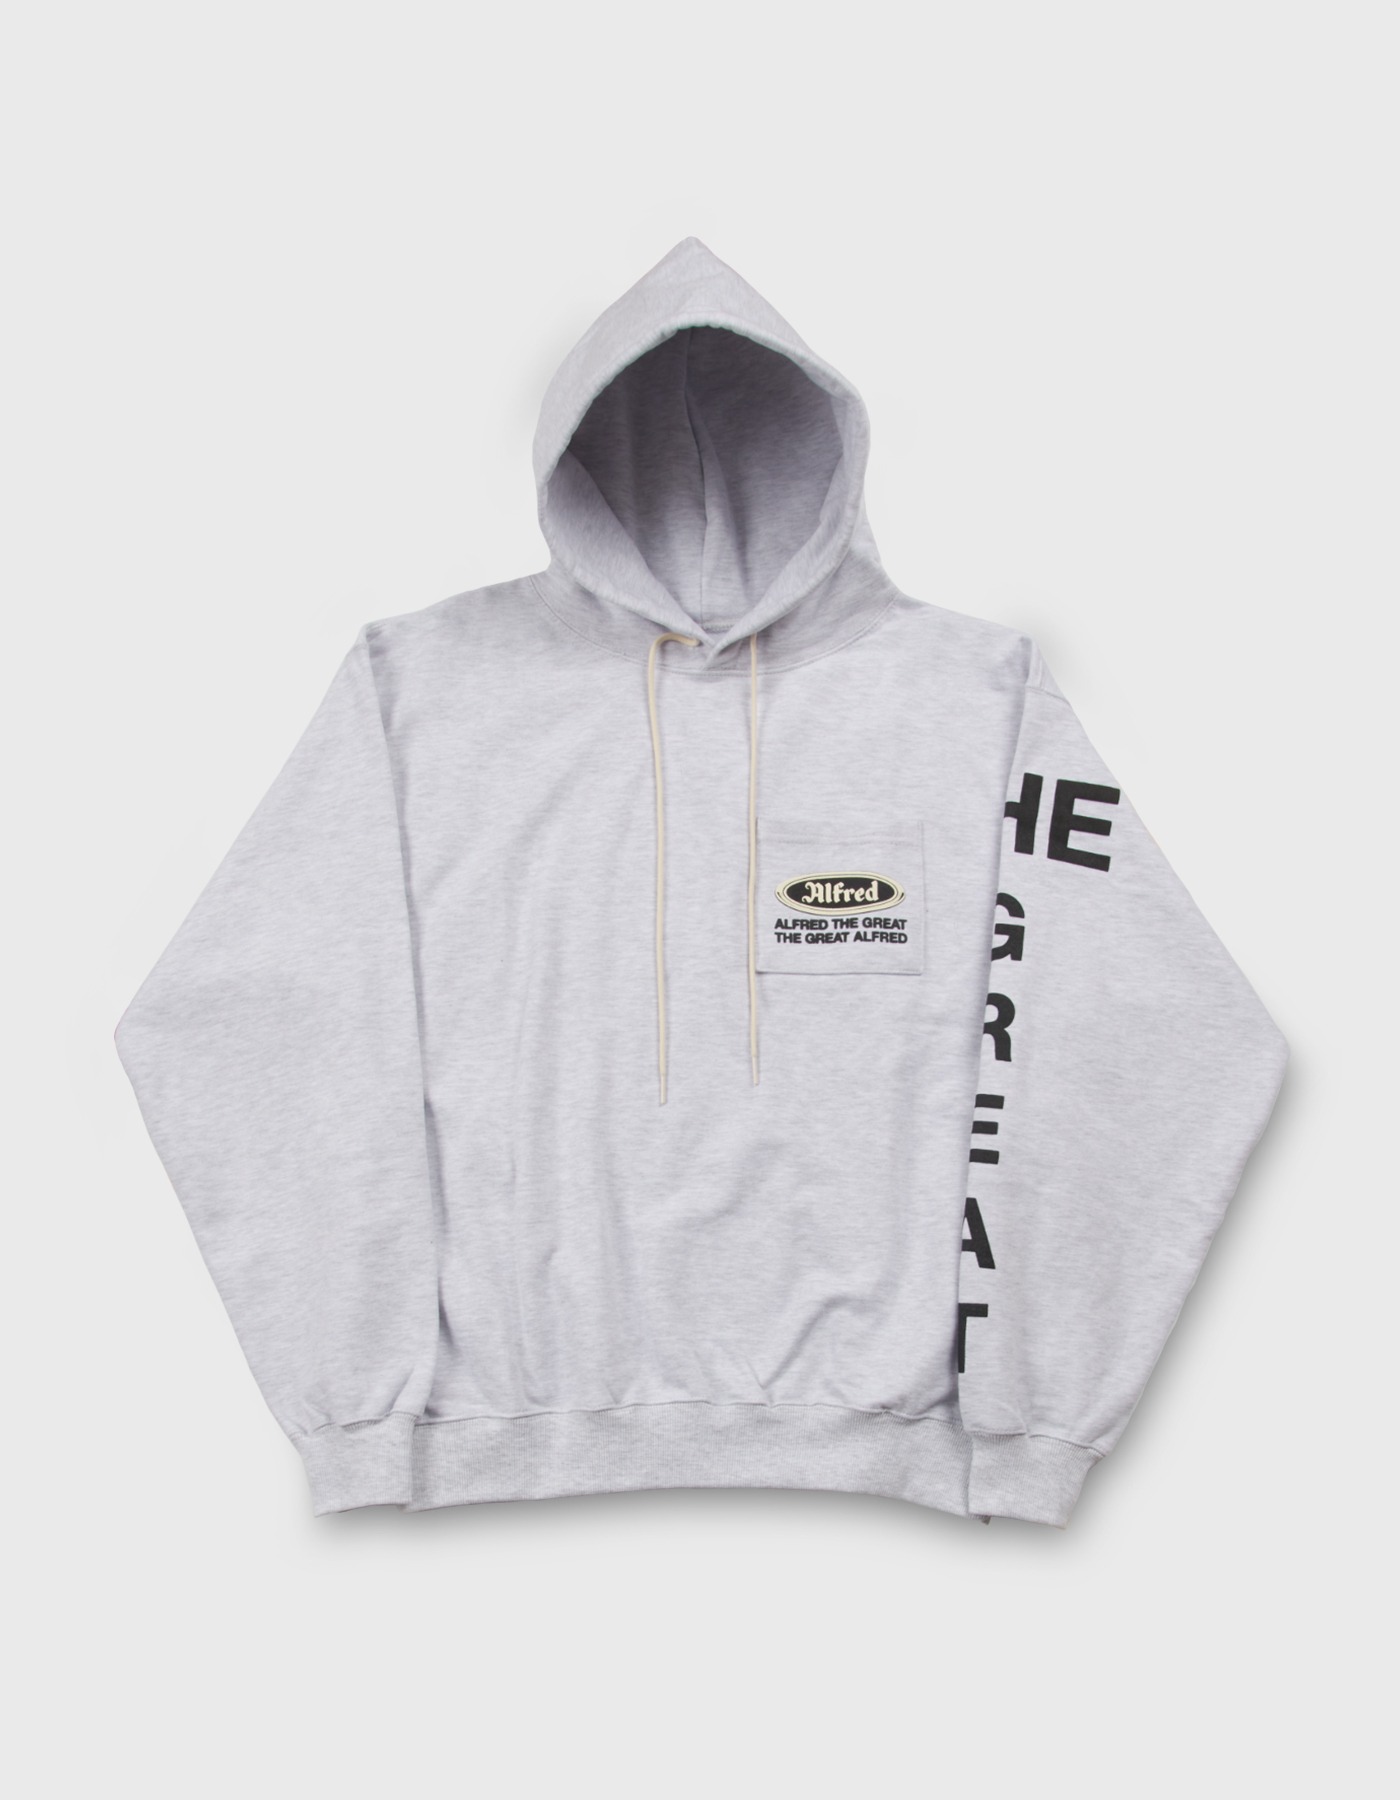 FRED THE GREAT HOODIE / M.grey(1%)